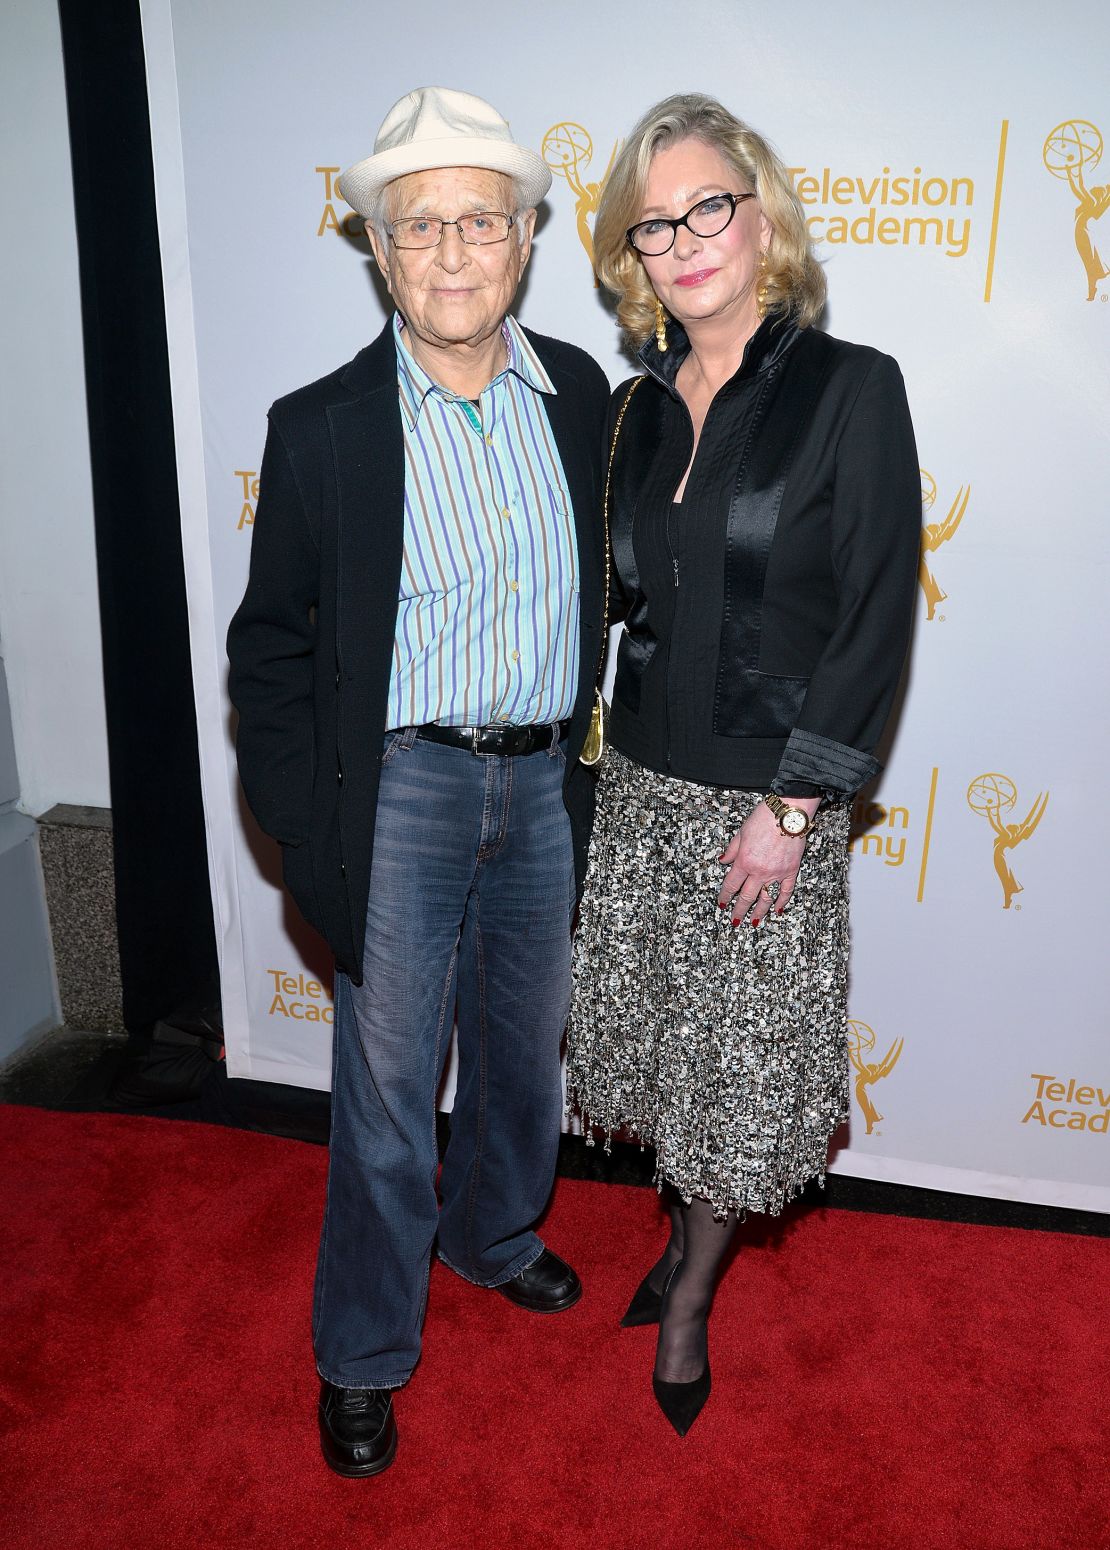 Norman Lear and Lyn Lear are both nominated for Emmy Awards this year. (Photo by Michael Tullberg/Getty Images)